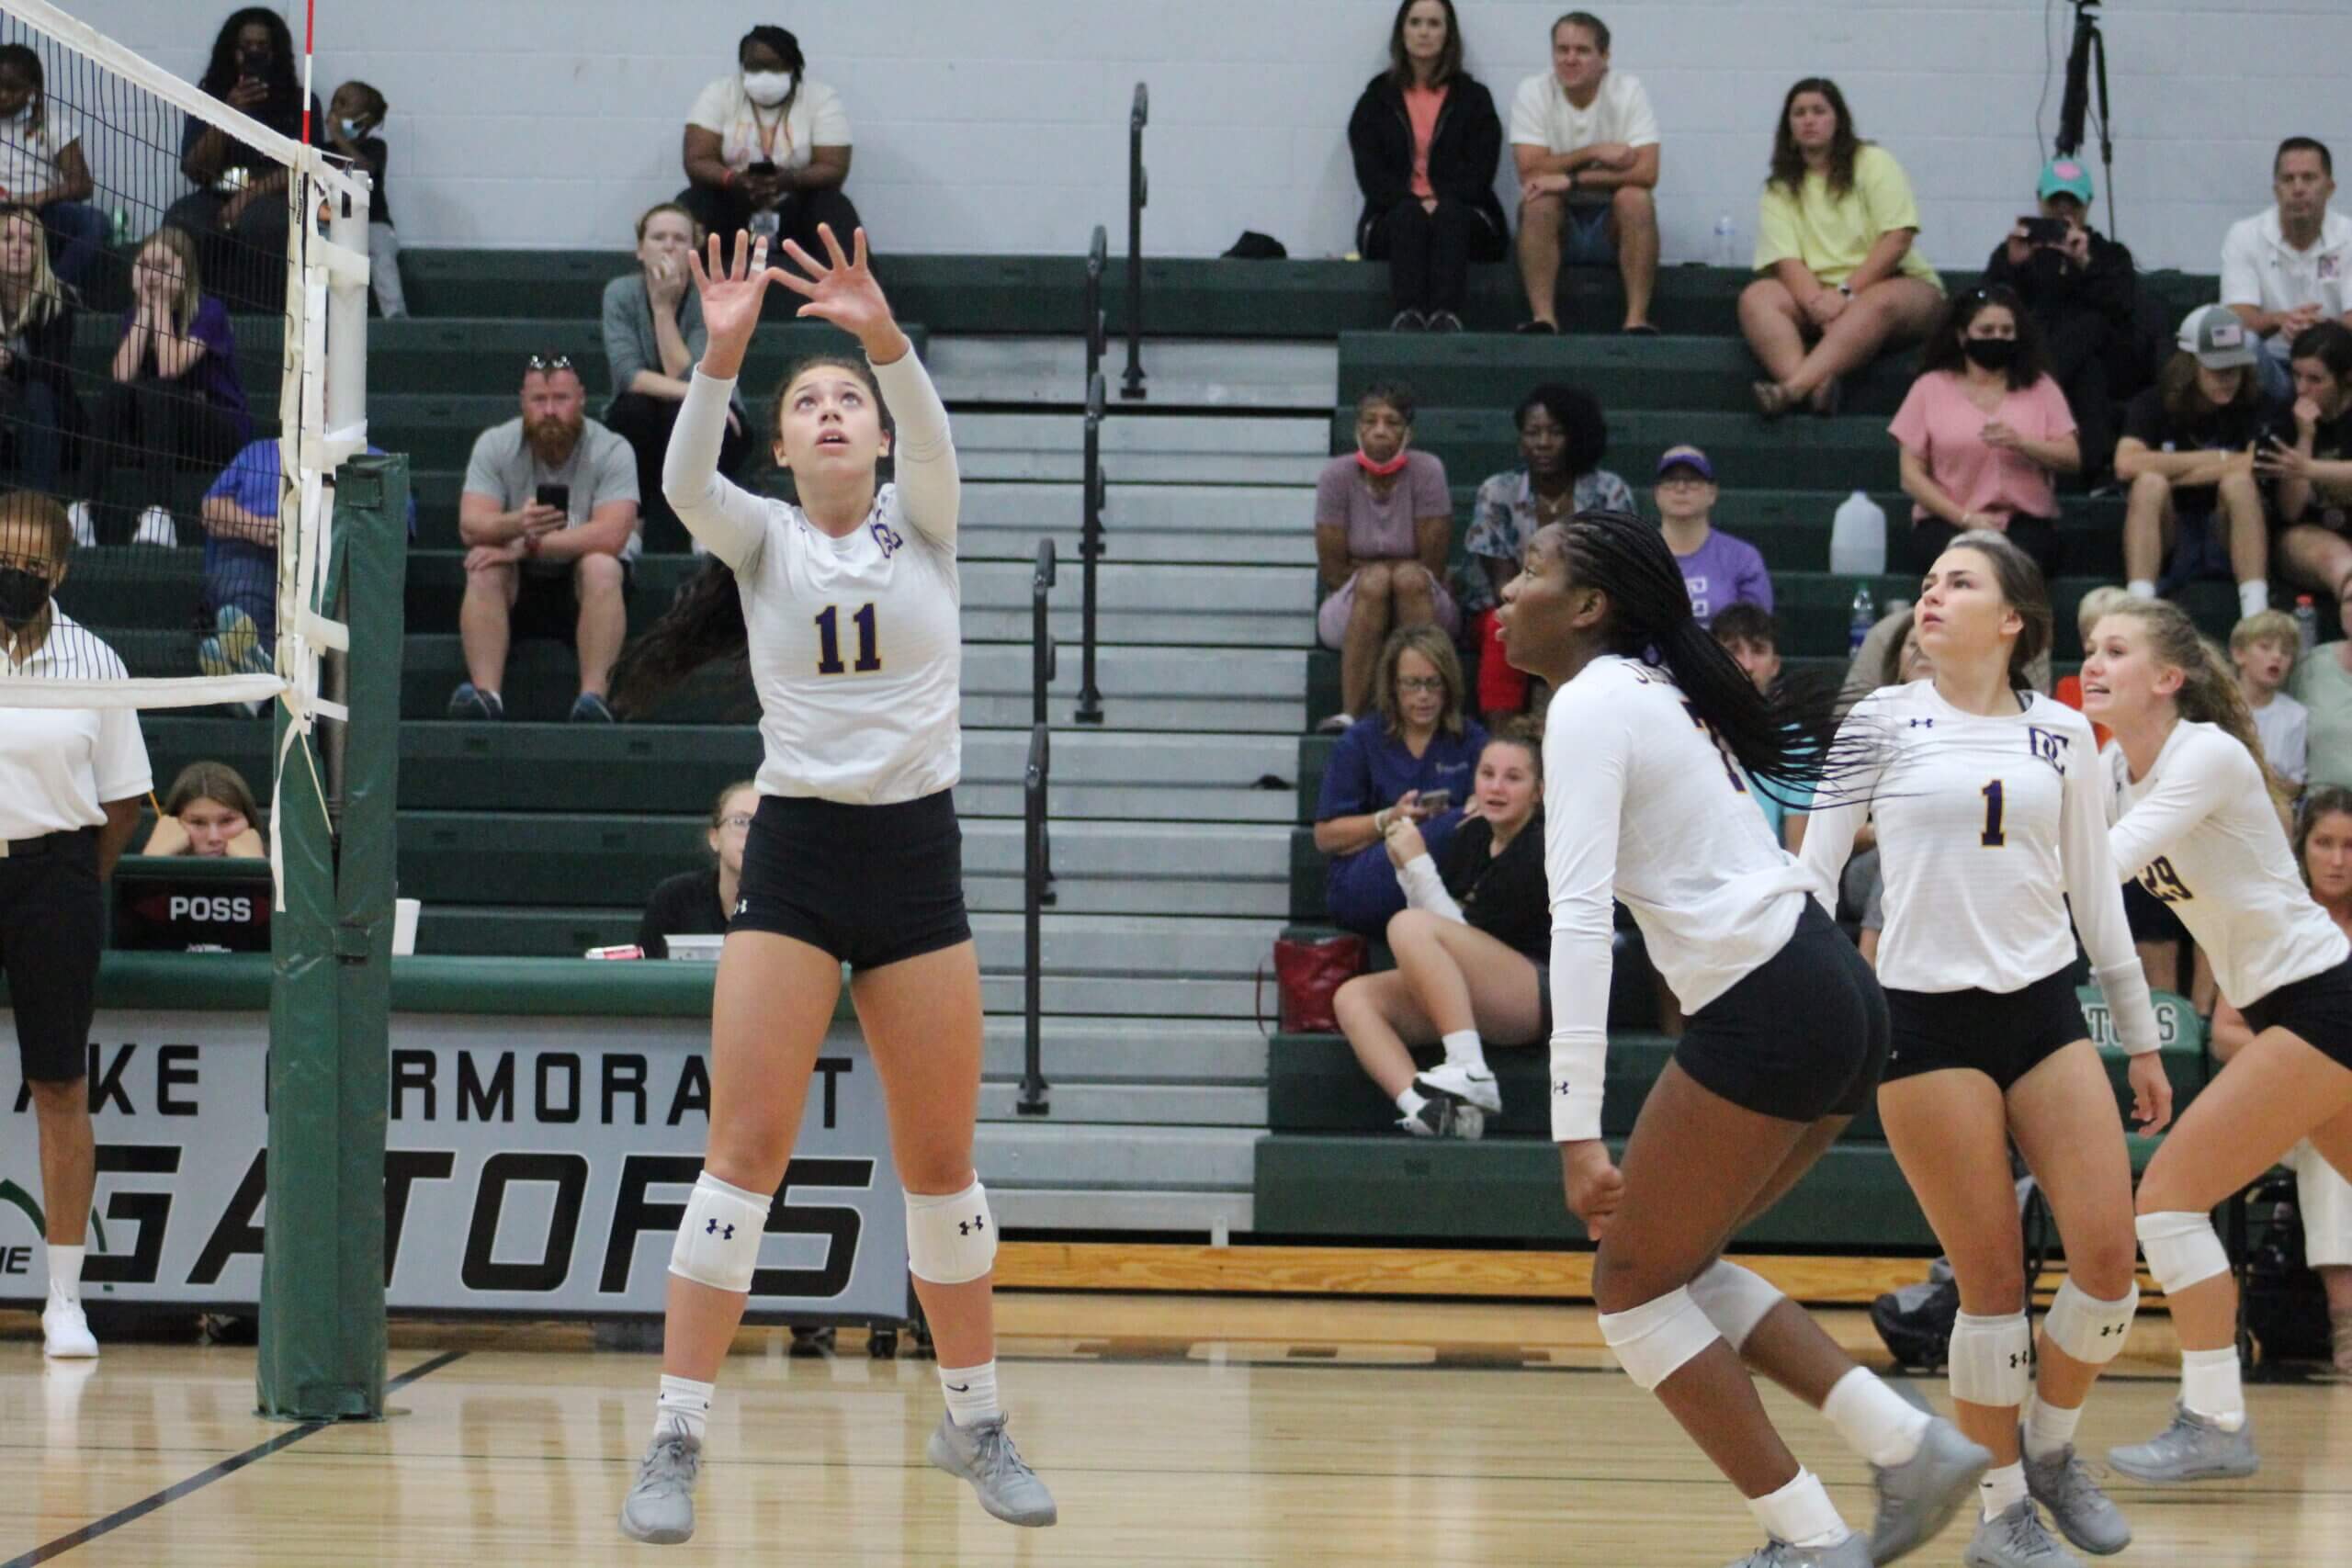 Lady Jags stop Lady Gators in battle of champions